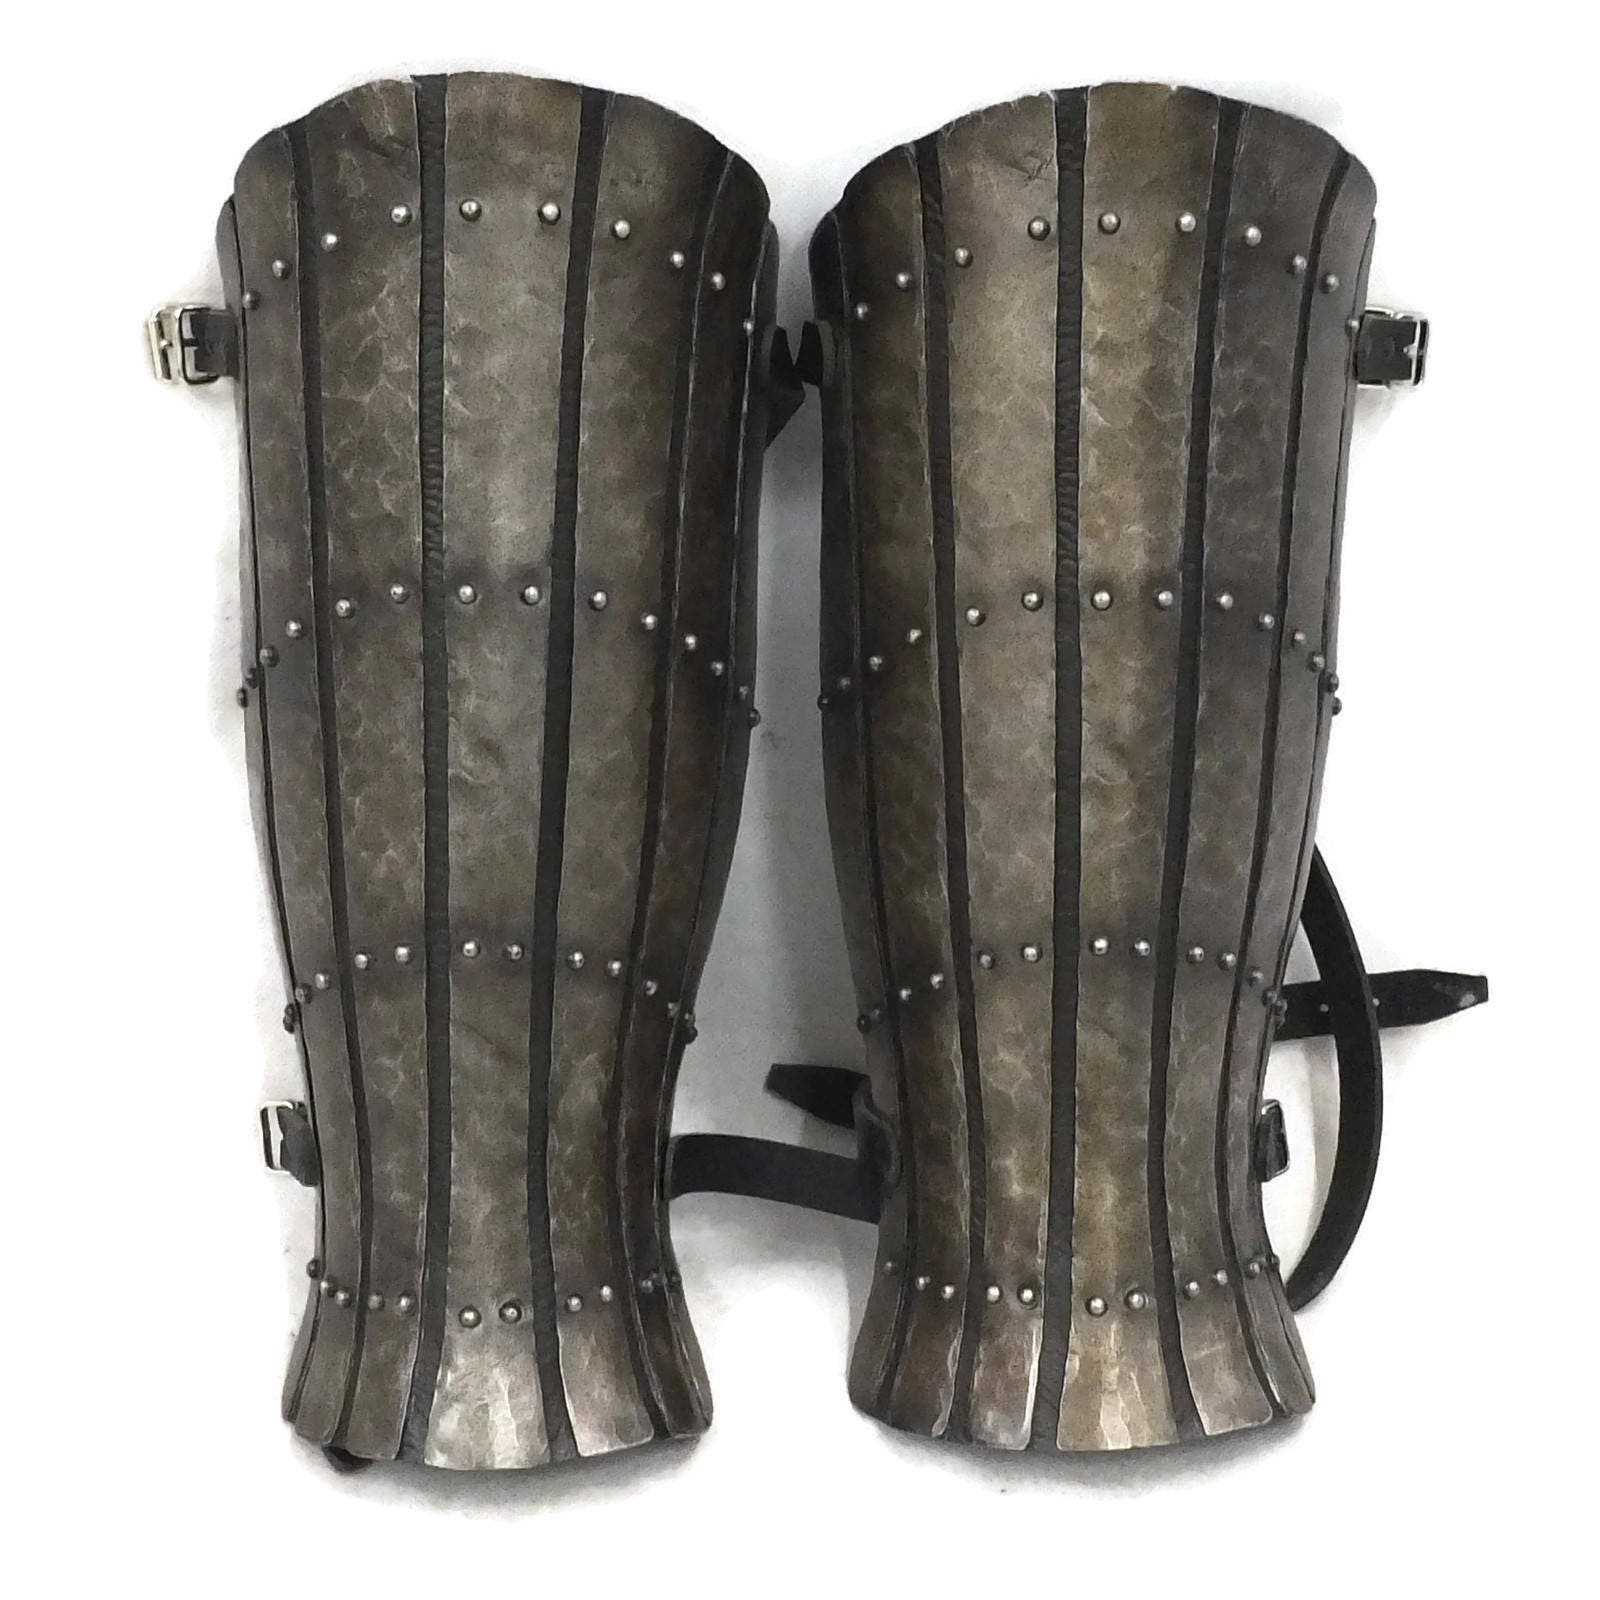 Richard Darkened Chainmail Gauntlets | Leather by Medieval Collectibles